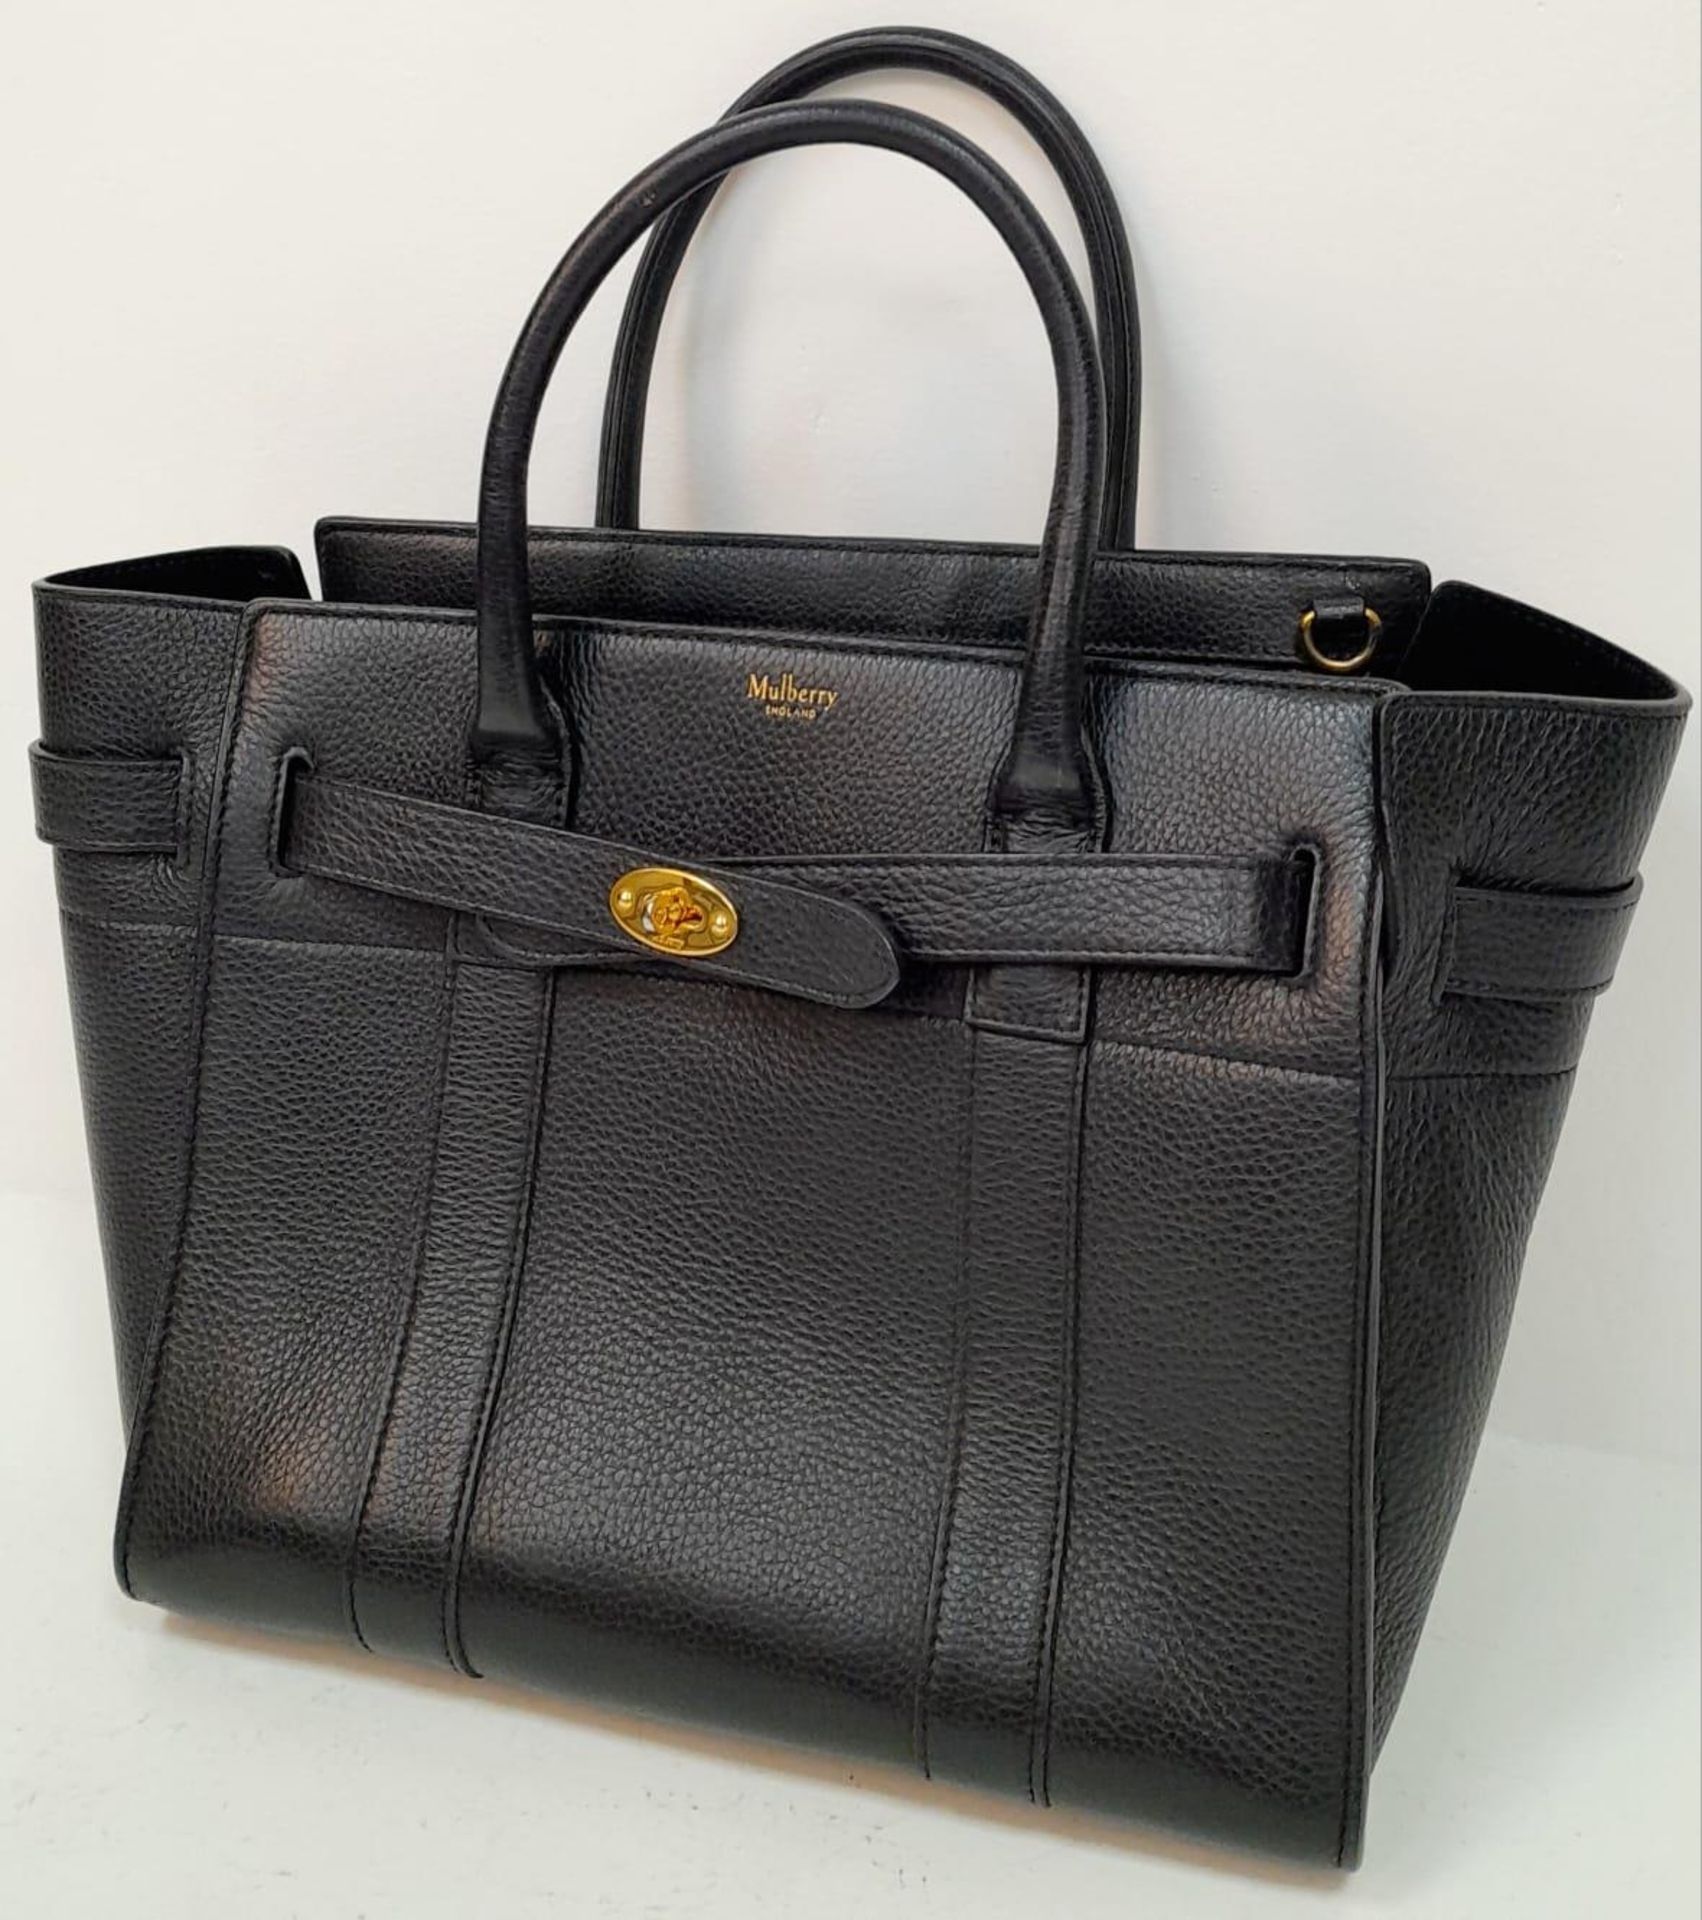 A Mulberry Bayswater Leather Handbag. Textured black leather exterior with gold tone hardware. - Image 2 of 9